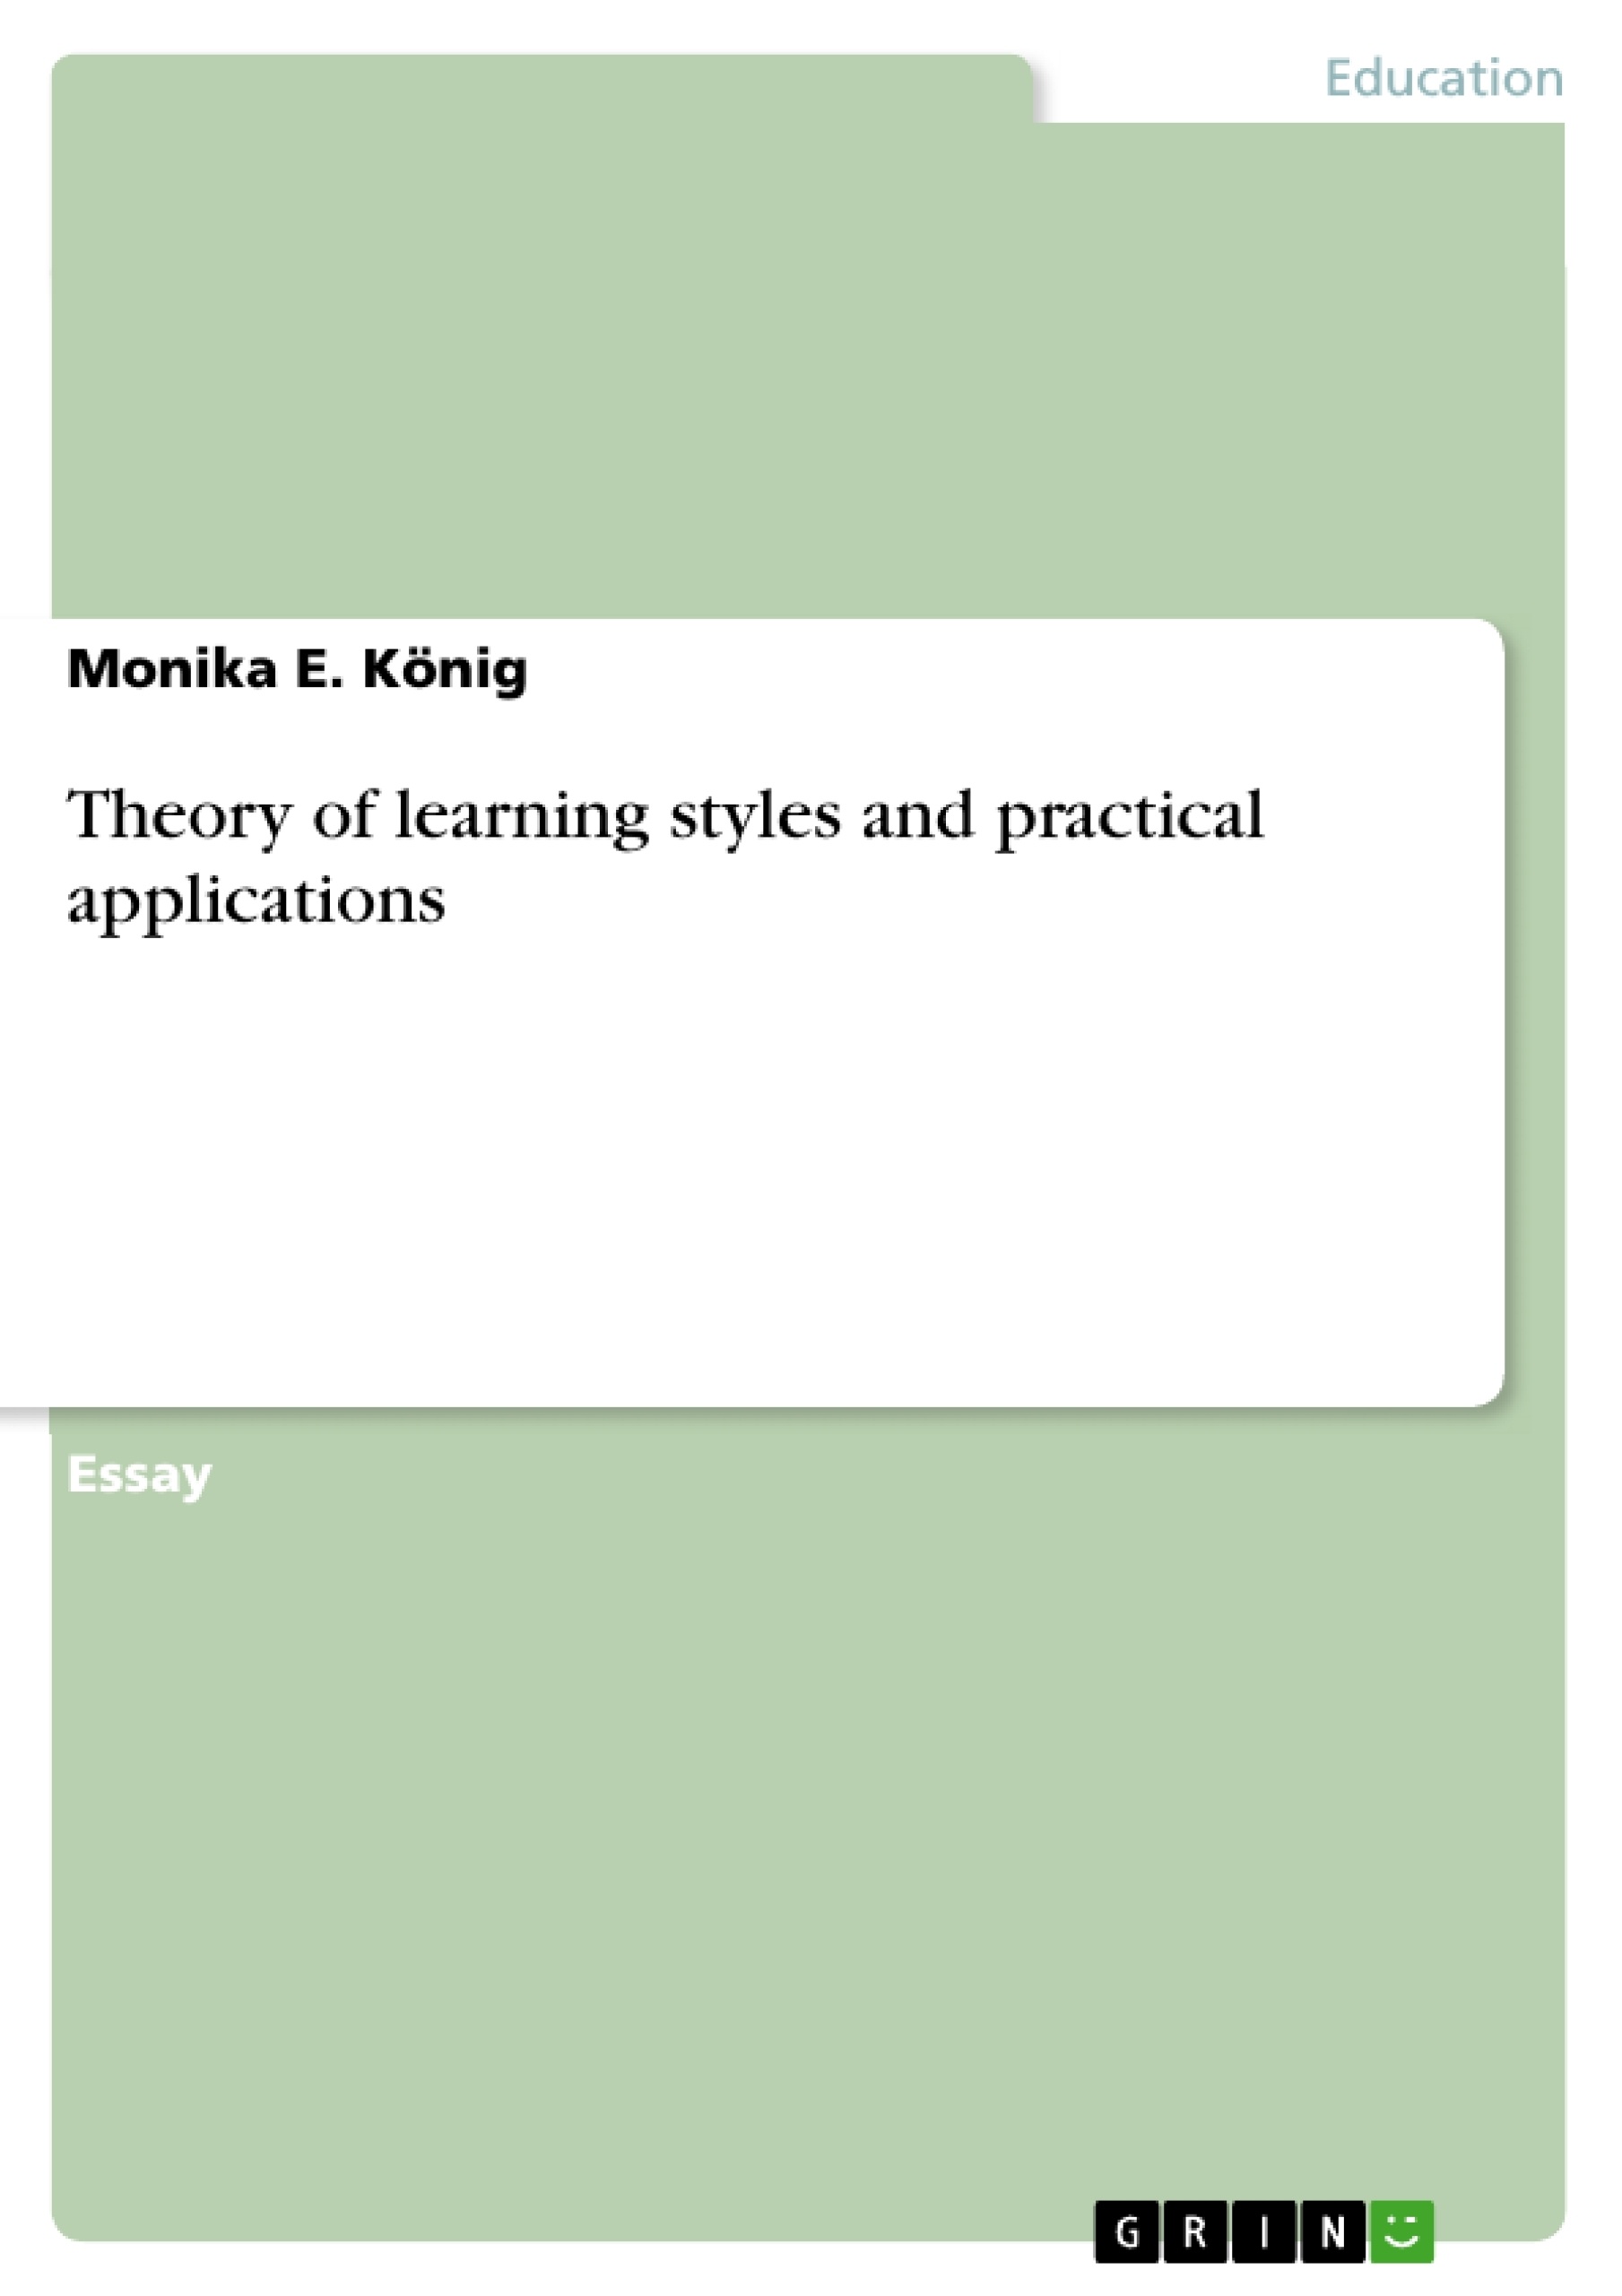 Title: Theory of learning styles and practical applications